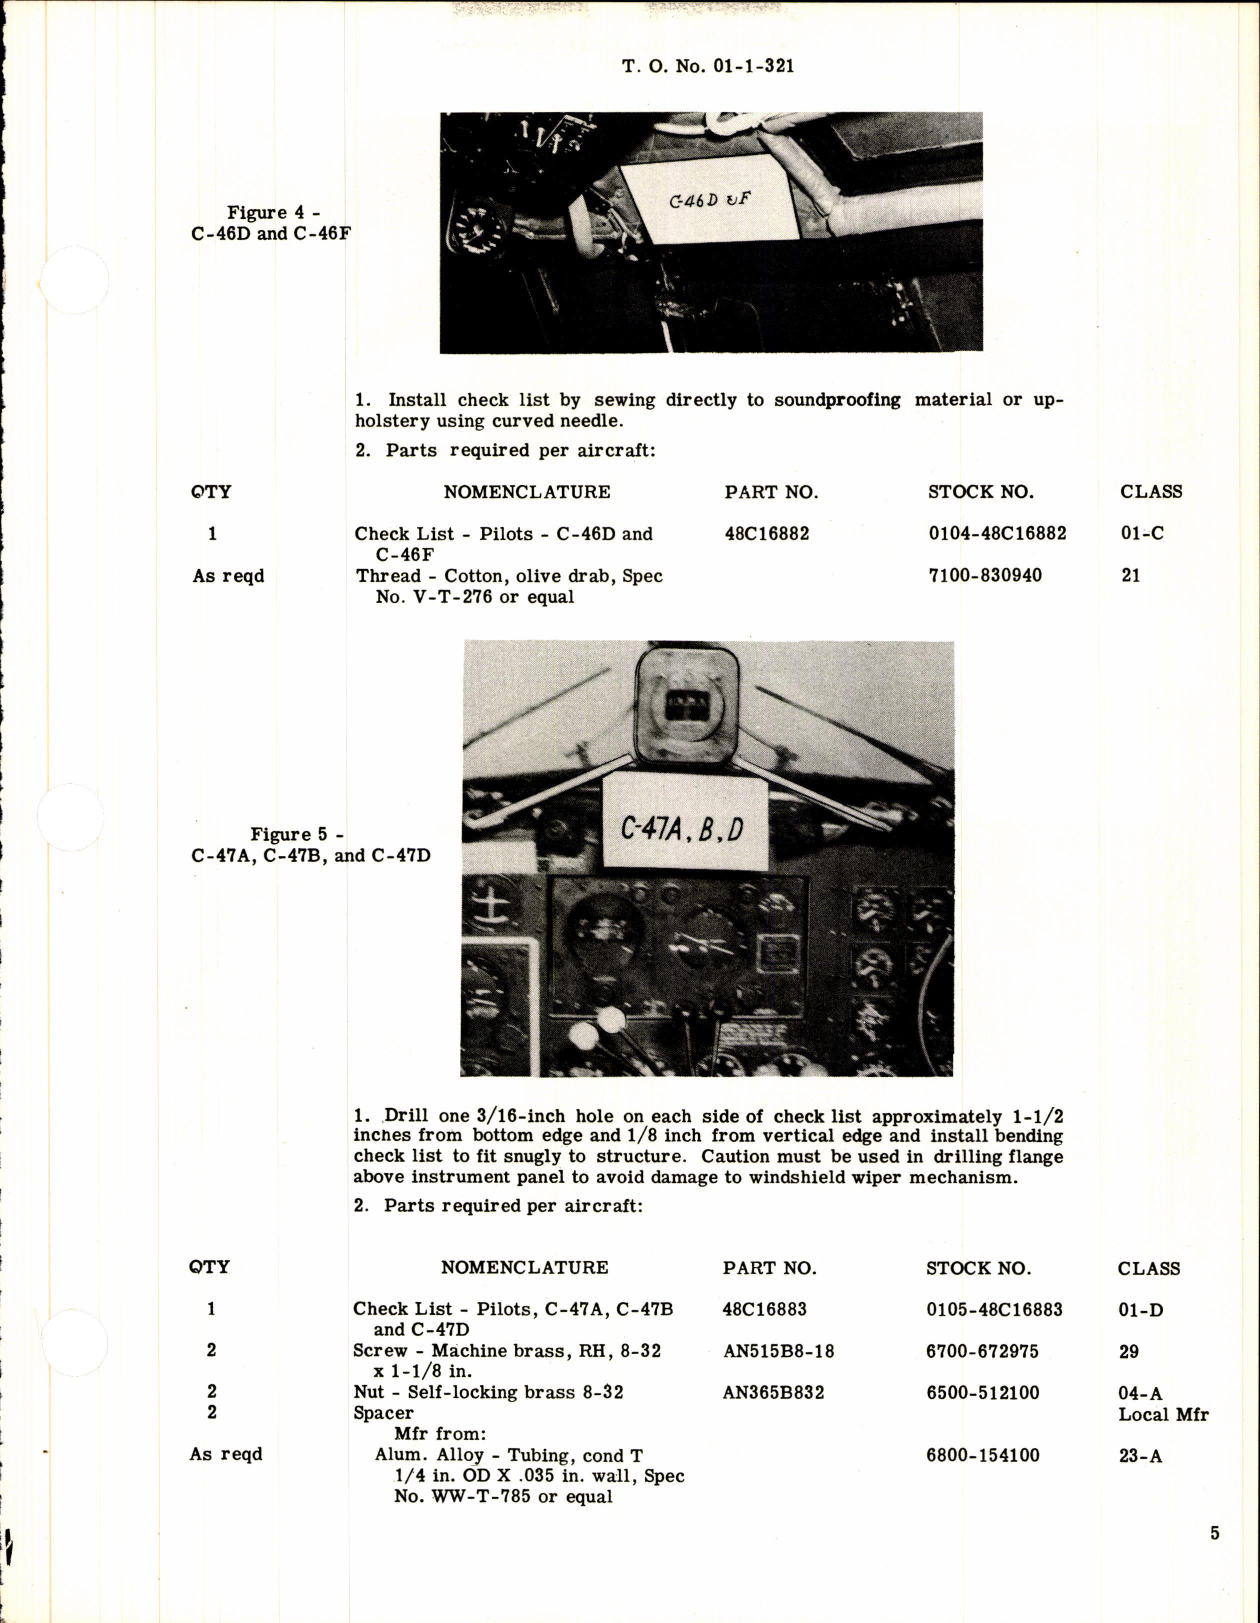 Sample page 5 from AirCorps Library document: Installation of Standard Air Crew Check Lists in Aircraft